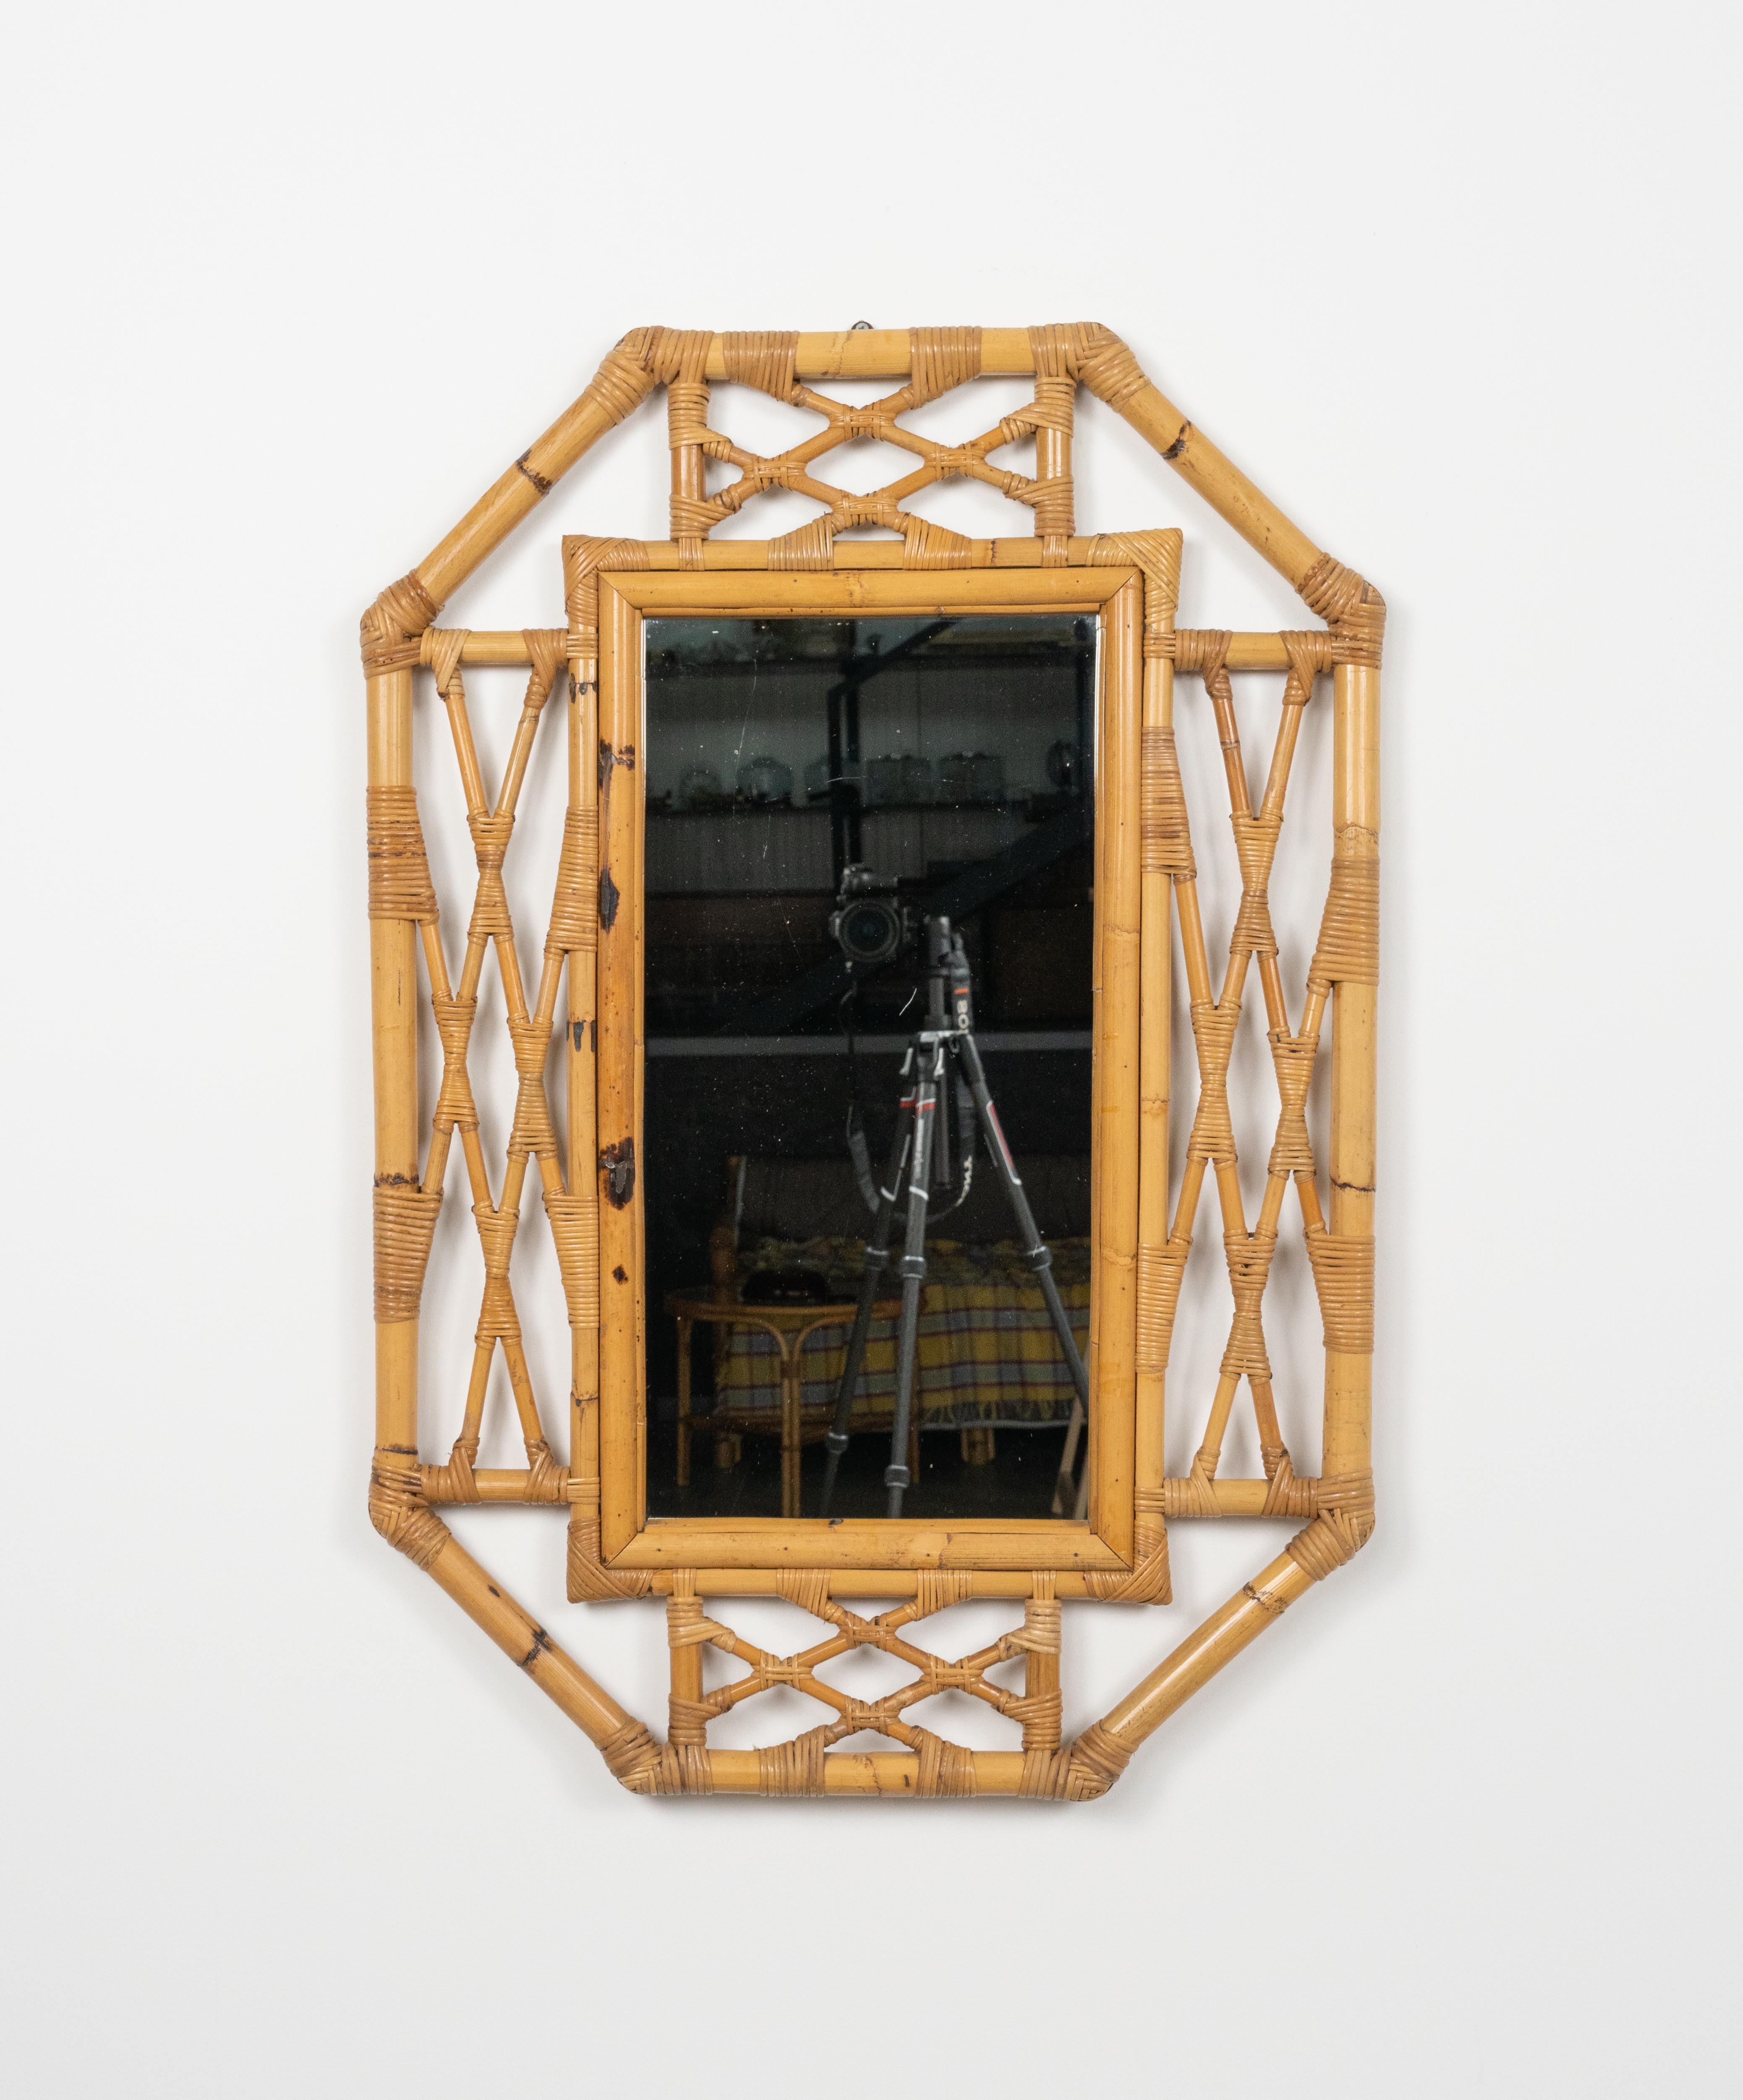 Midcentury Bamboo and Rattan Wall Mirror Vivai Del Sud Style, Italy 1970s In Good Condition For Sale In Rome, IT